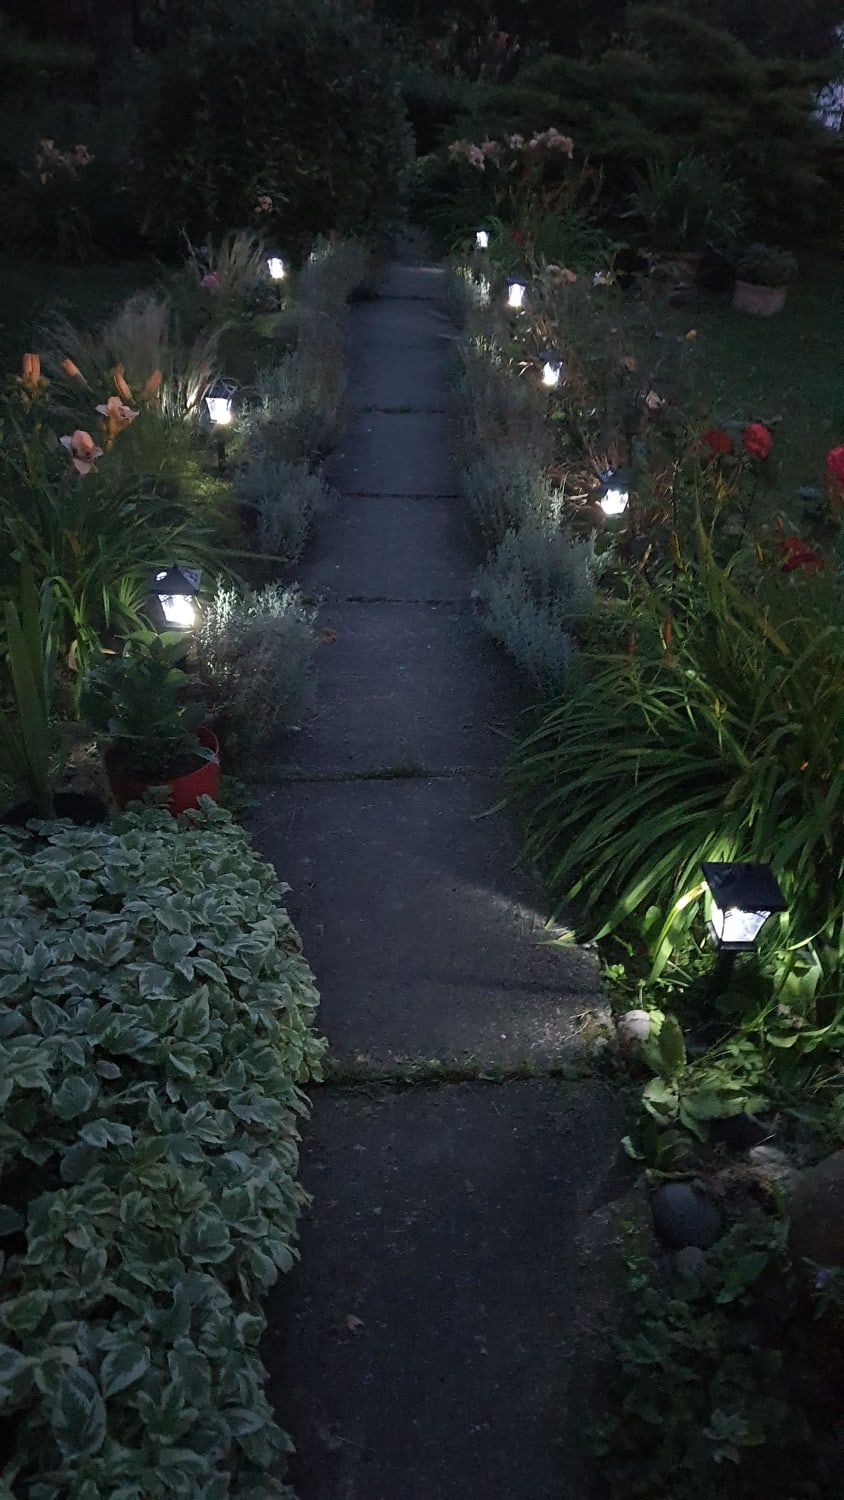 My mother's garden at twilight